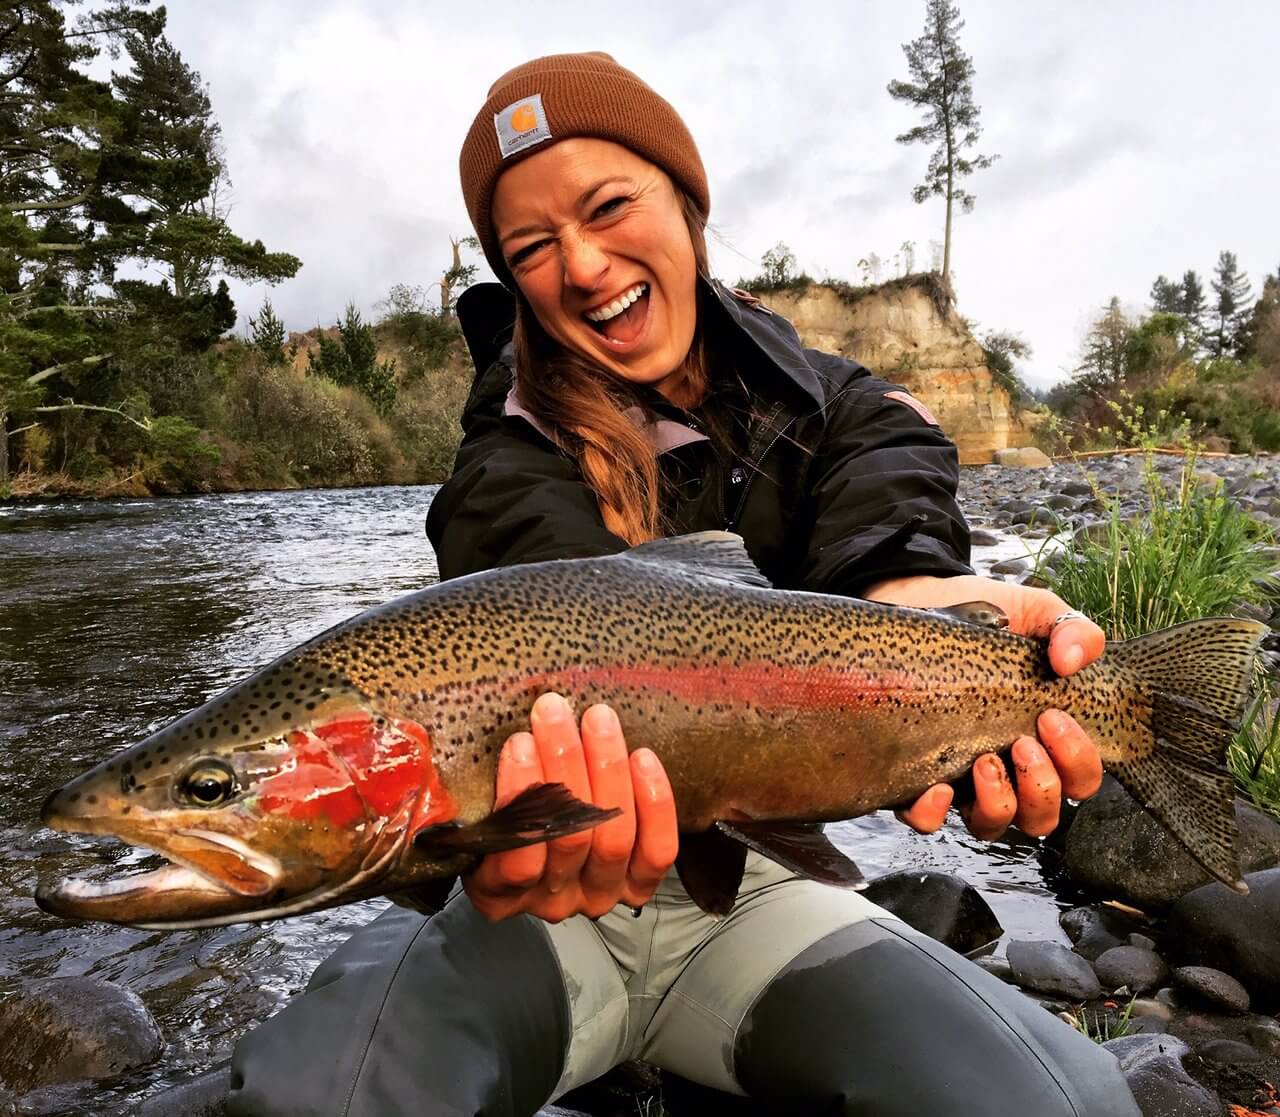 Romancing the trout